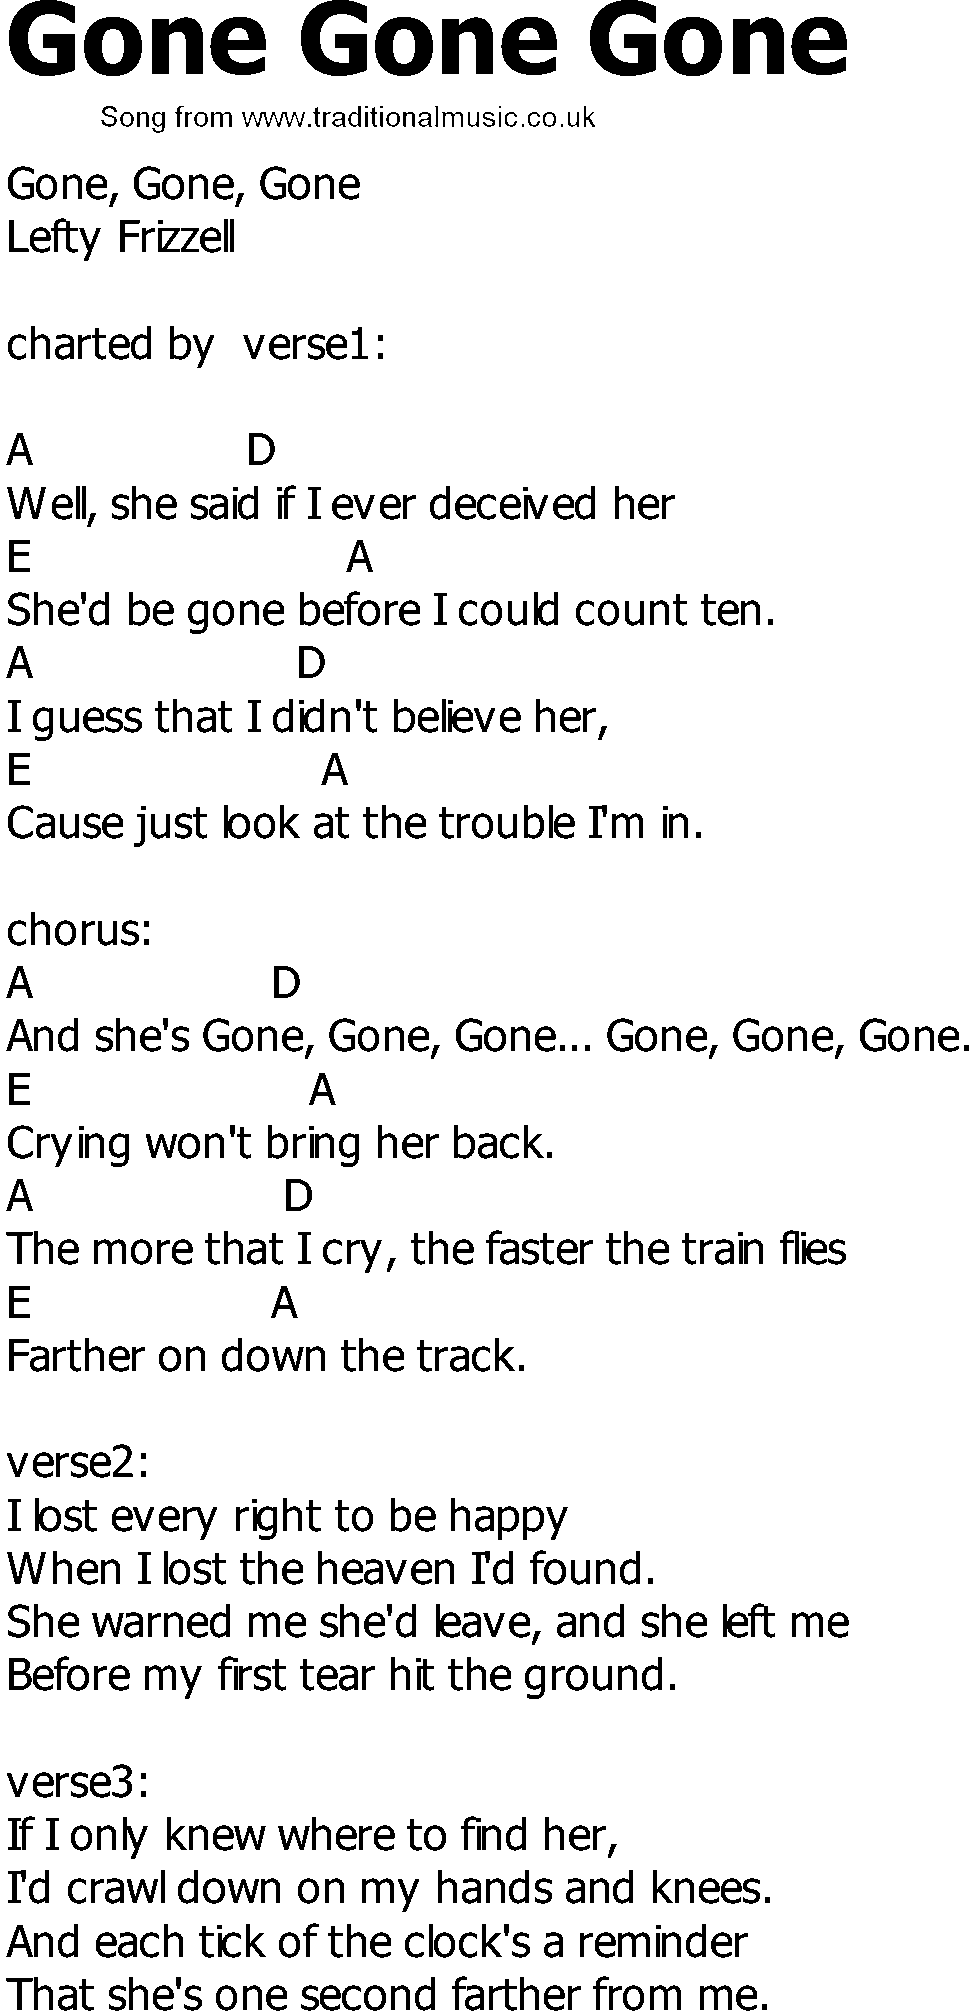 Old Country song lyrics with chords - Gone Gone Gone